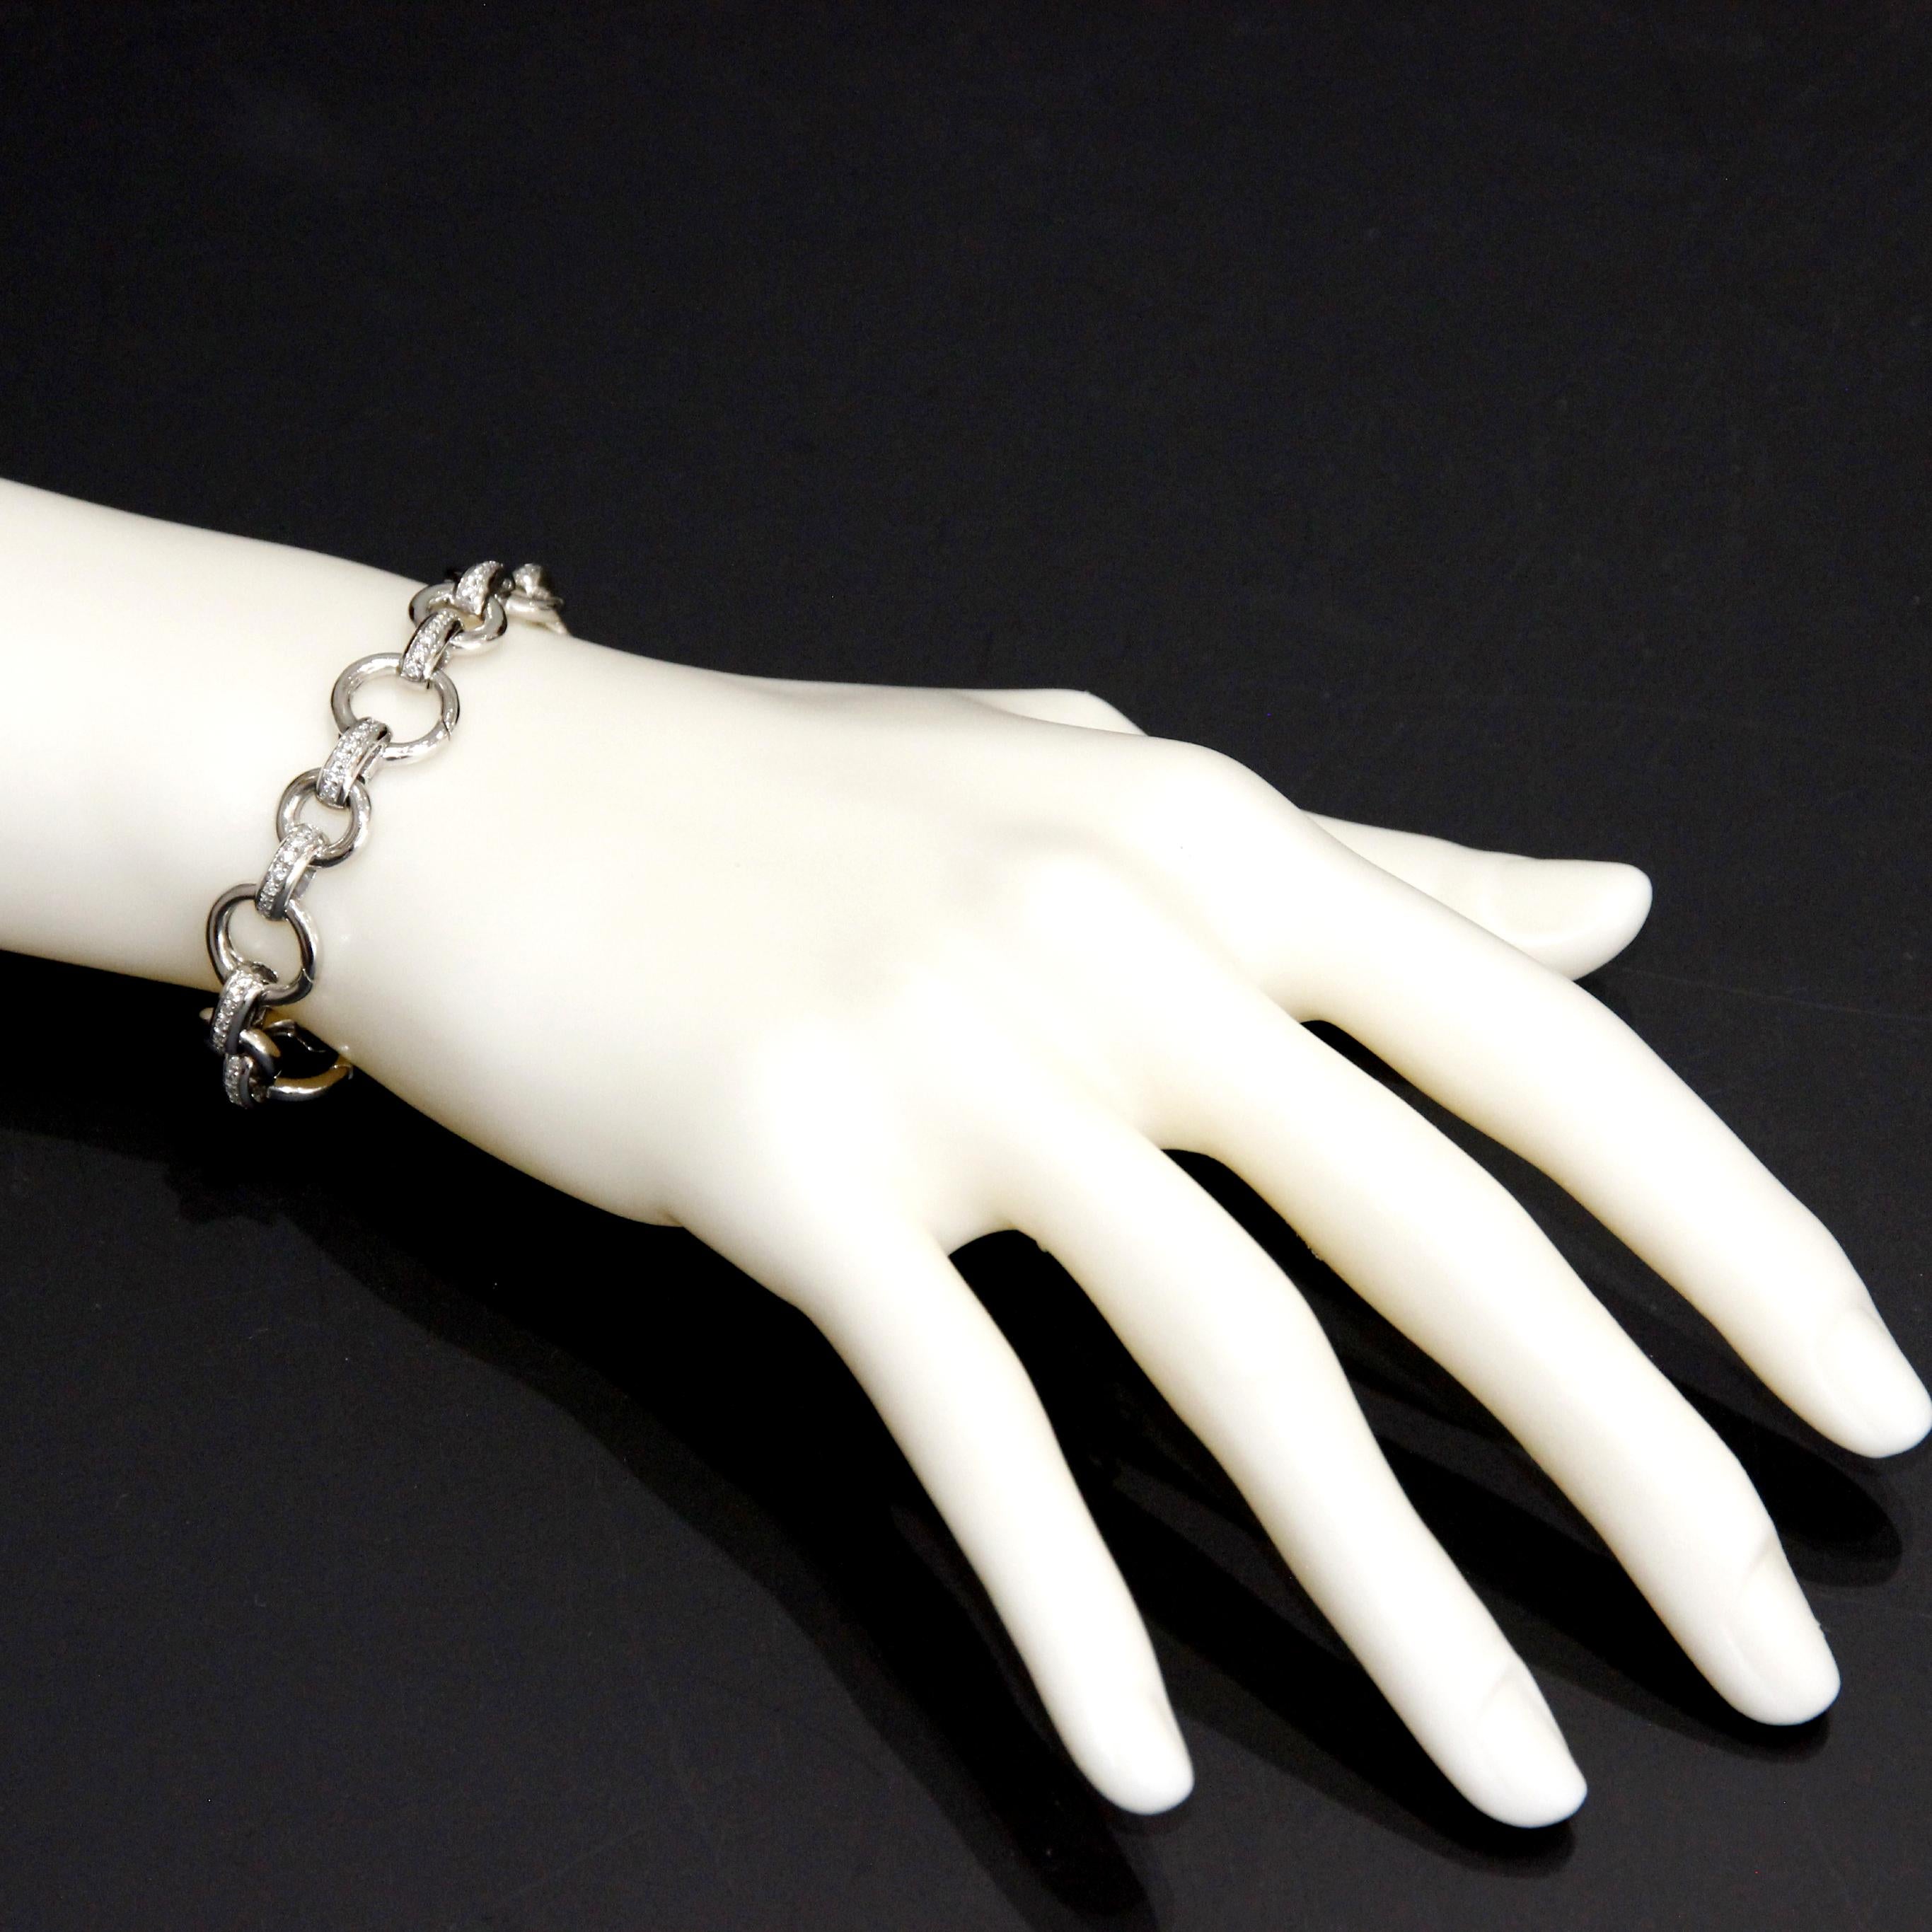 Aaron Basha 18k White Gold  and Diamonds  Link Bracelet  D=0.95ctw     In New Condition For Sale In North Miami Beach, FL